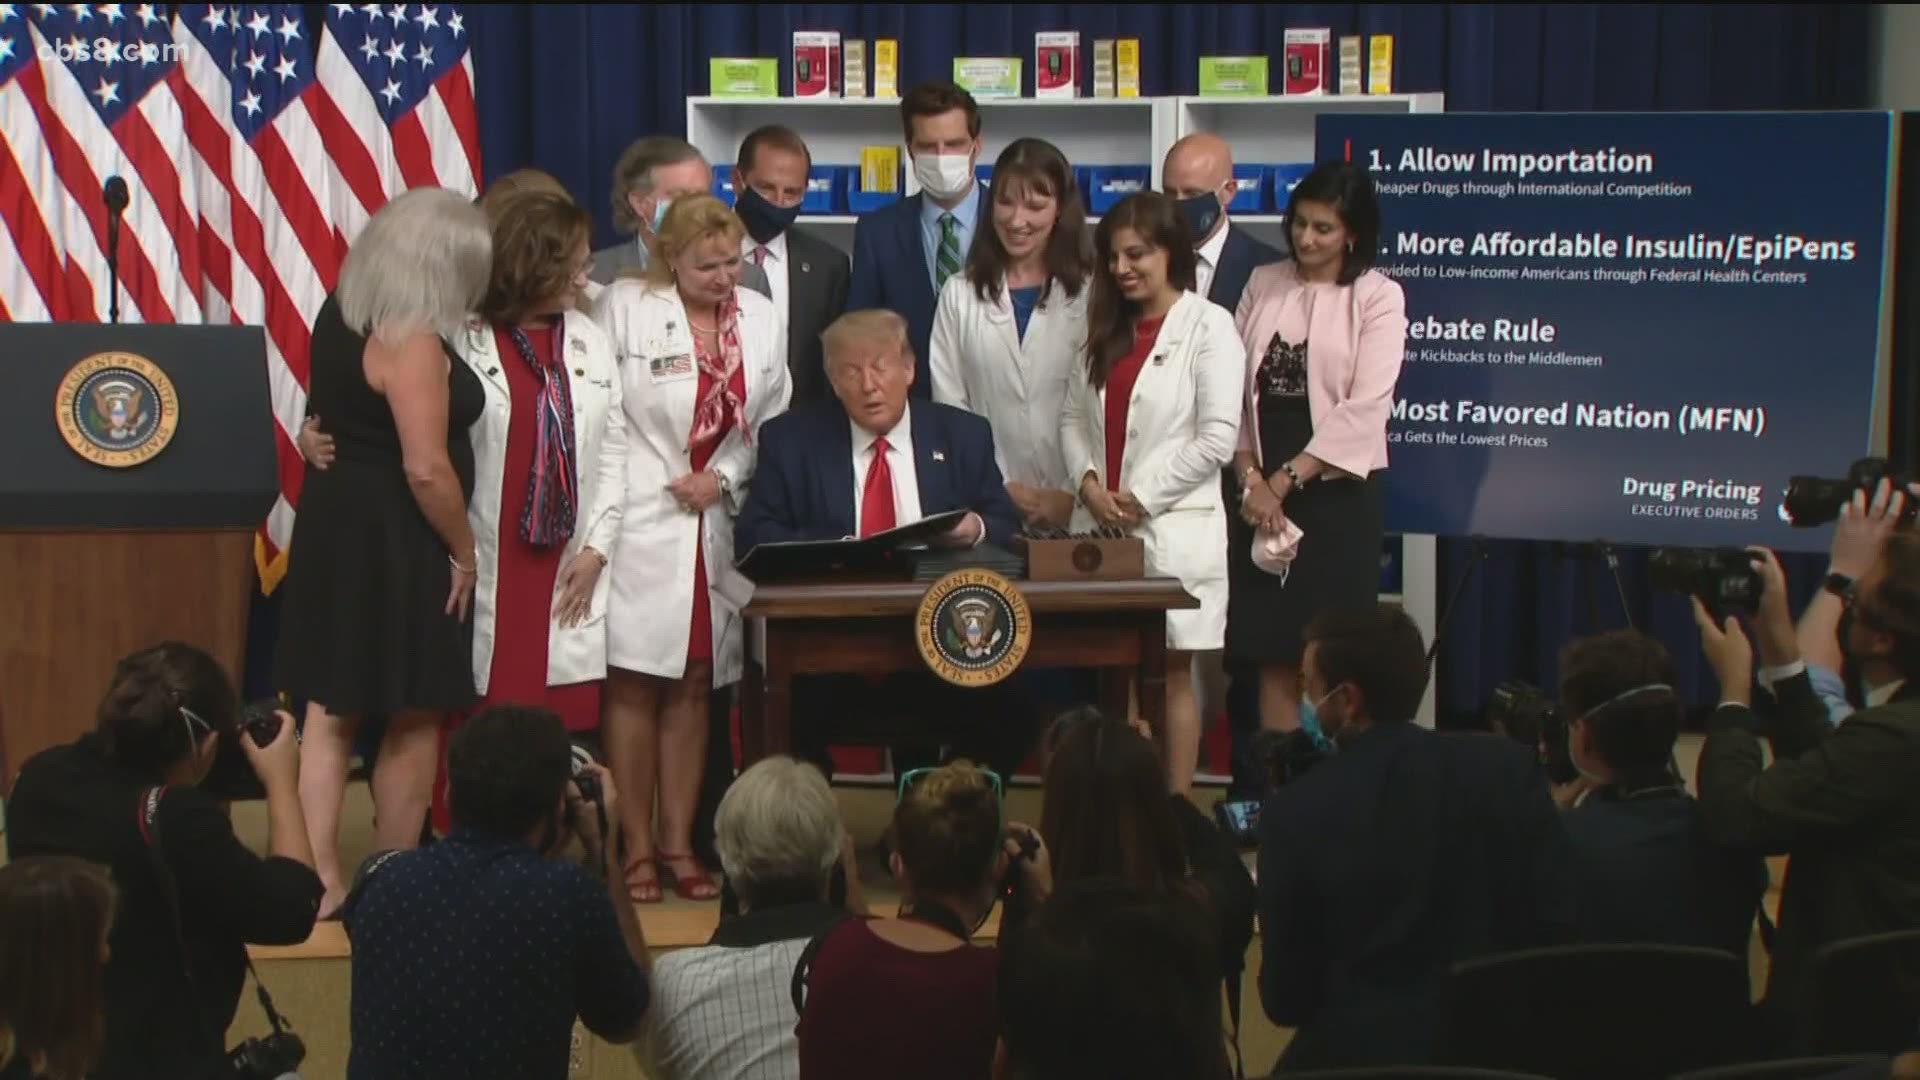 "My administration is issuing two groundbreaking rules to very dramatically lower the price of prescription drugs for the American people," said Trump.